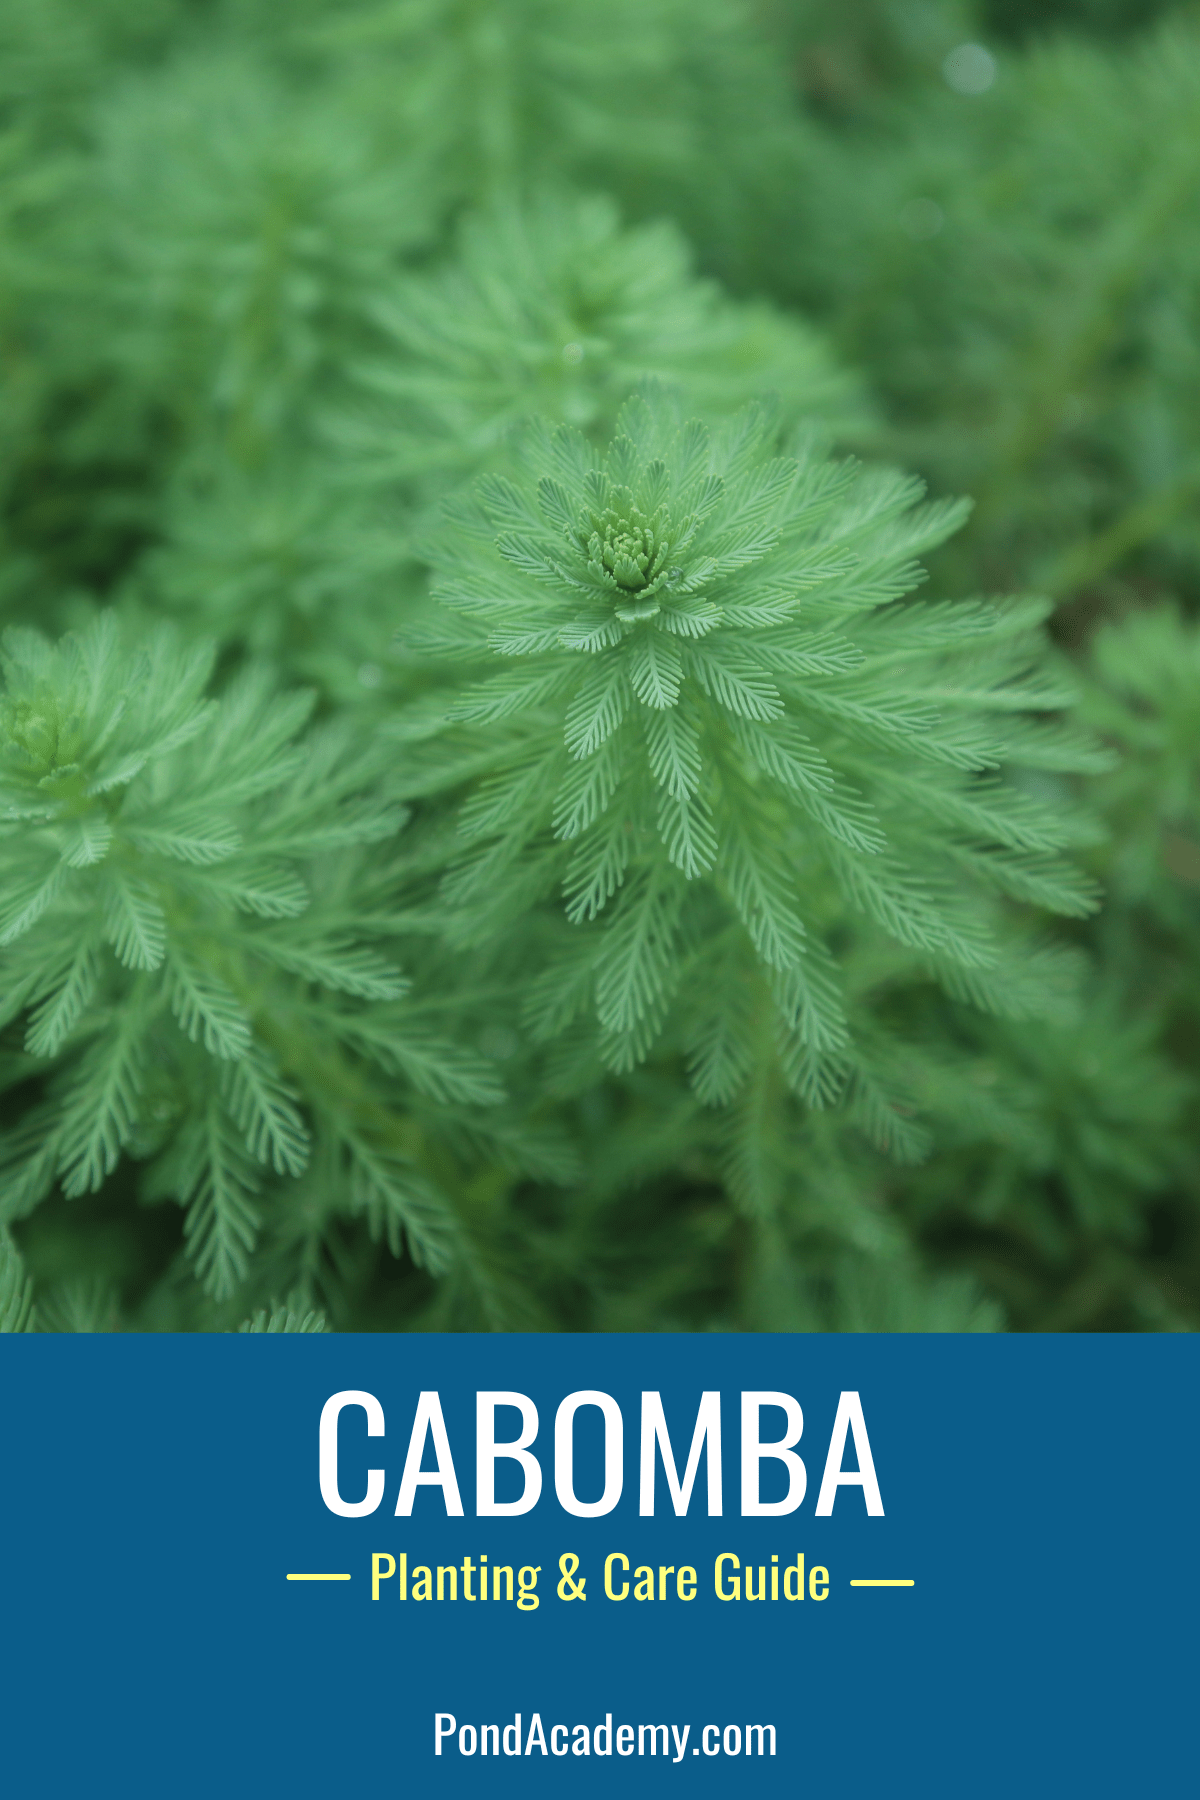 how to plant cabomba in a pond